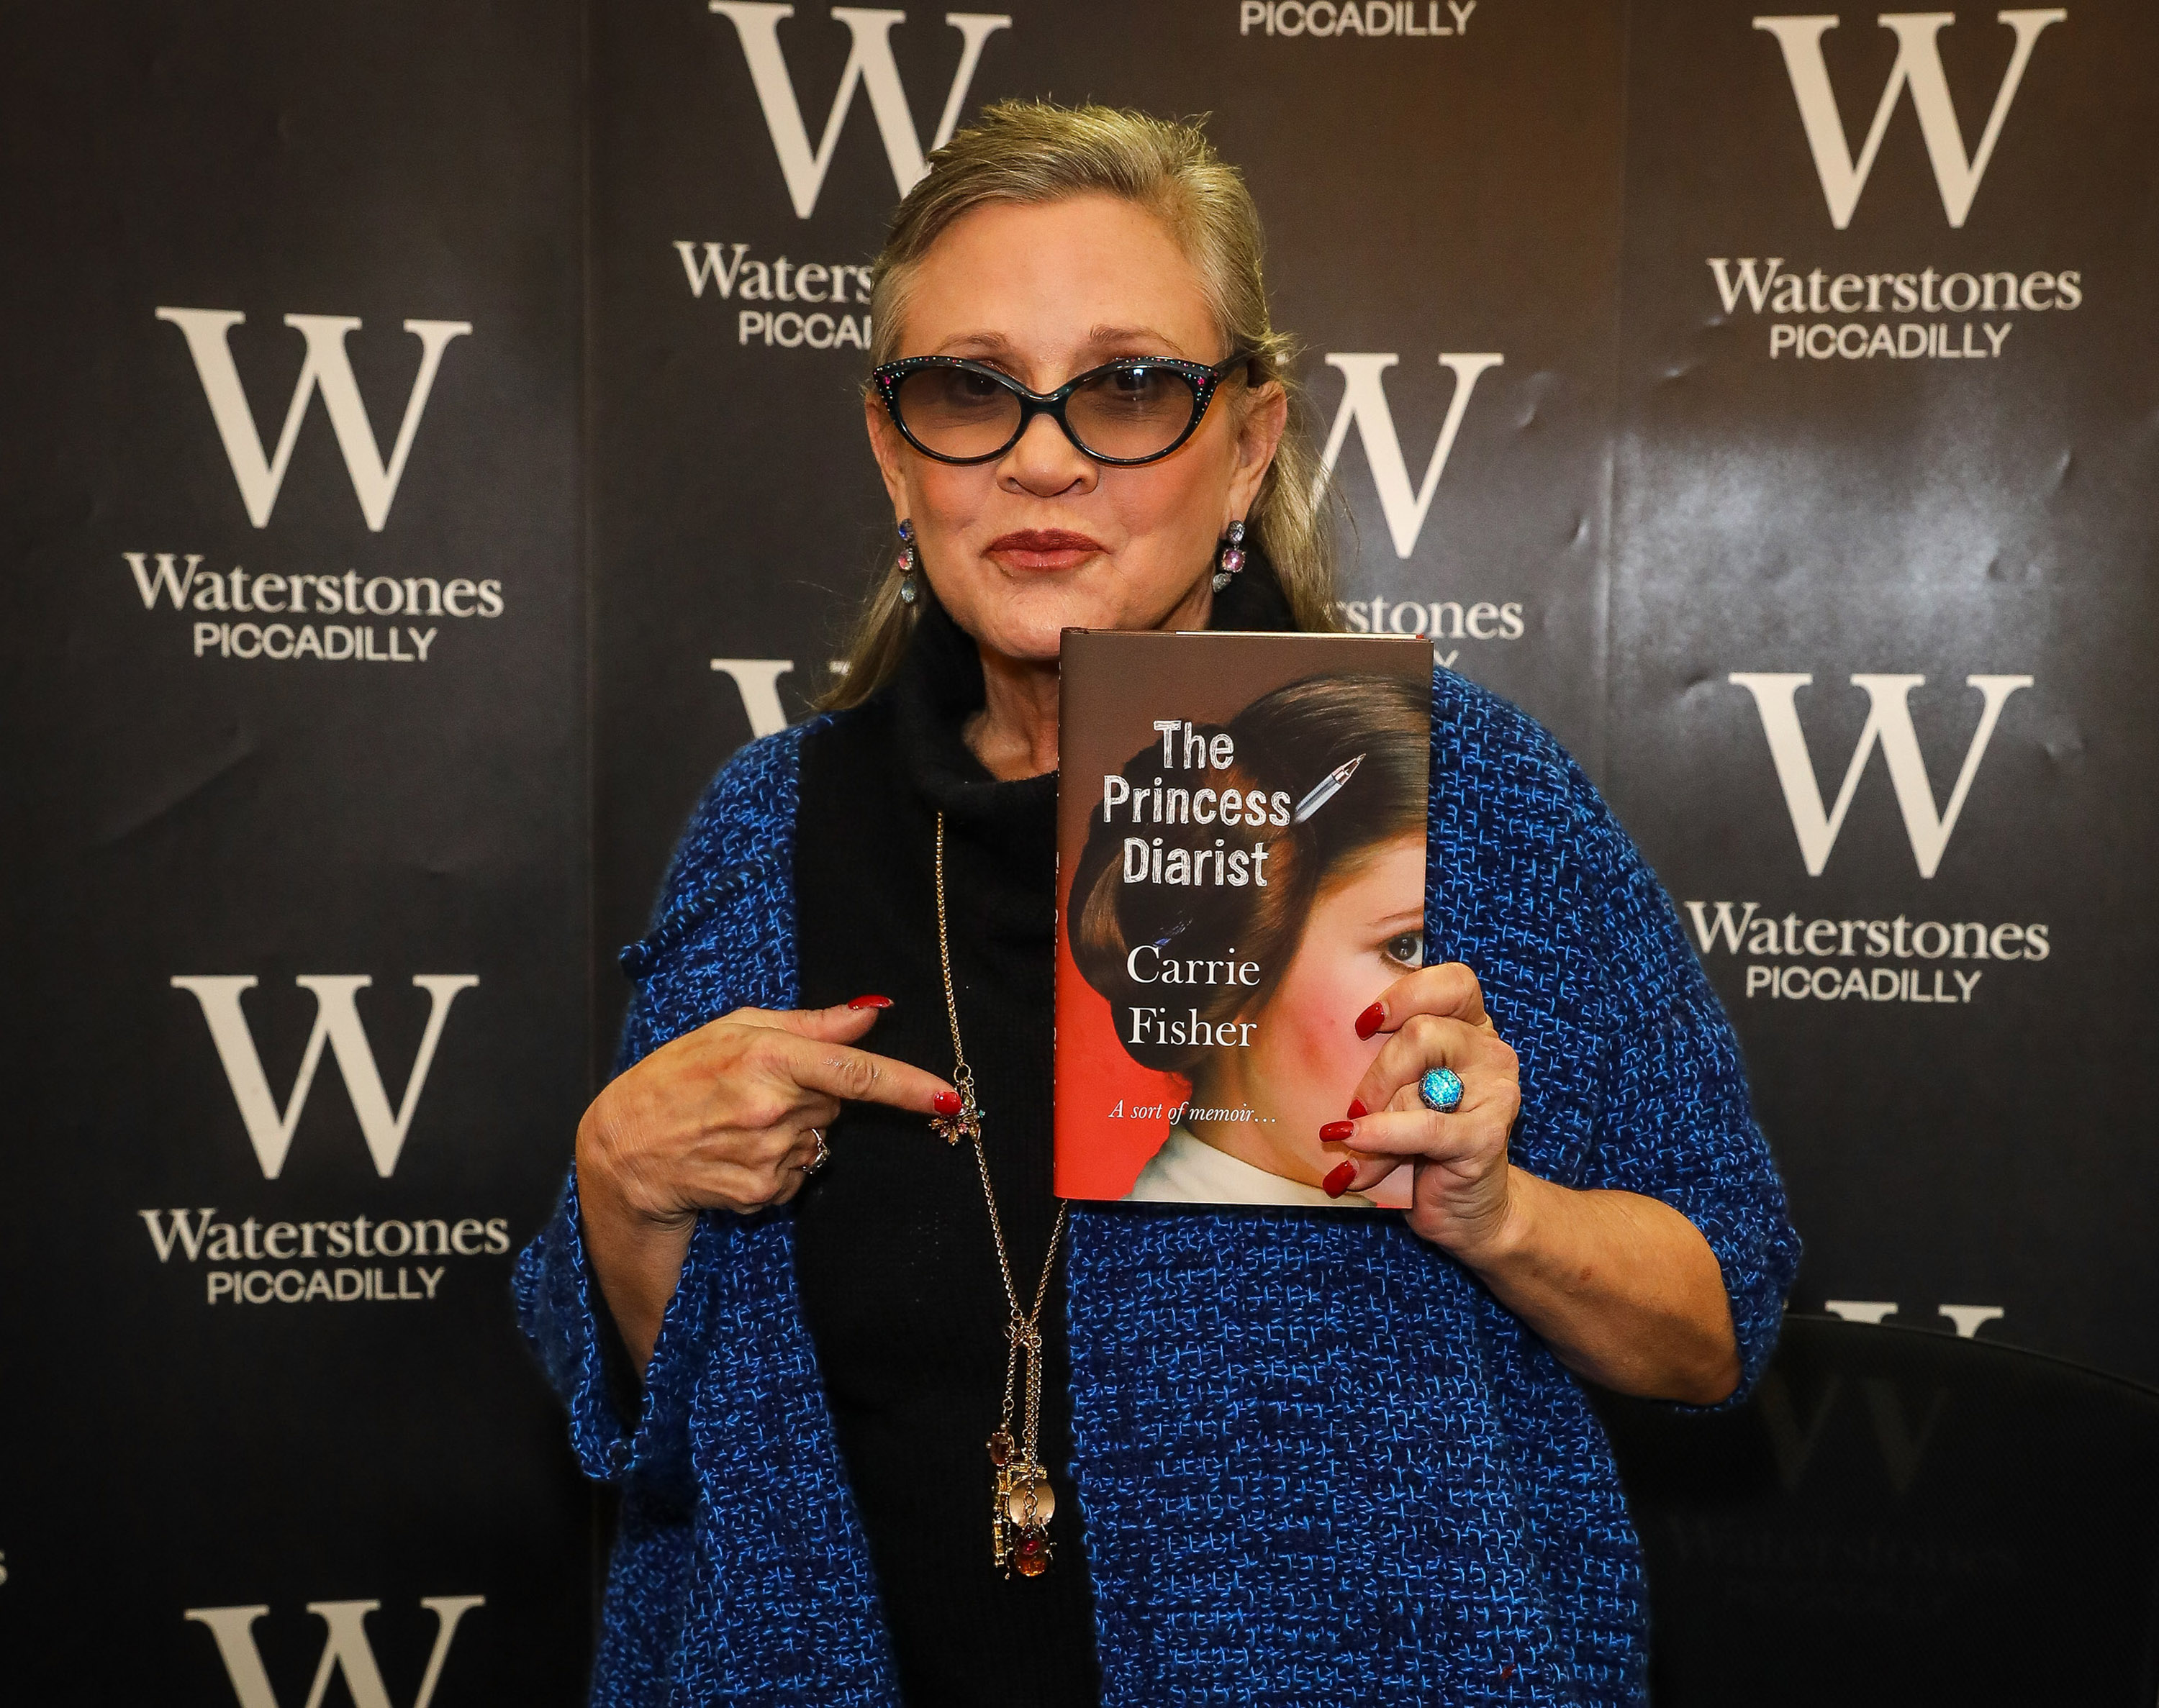 Carrie Fisher signs copies of her new book "The Princess Diarist" at Waterstones, Piccadilly, on December 11, 2016 in London, England. (David M. Benett&mdash;Getty Images)